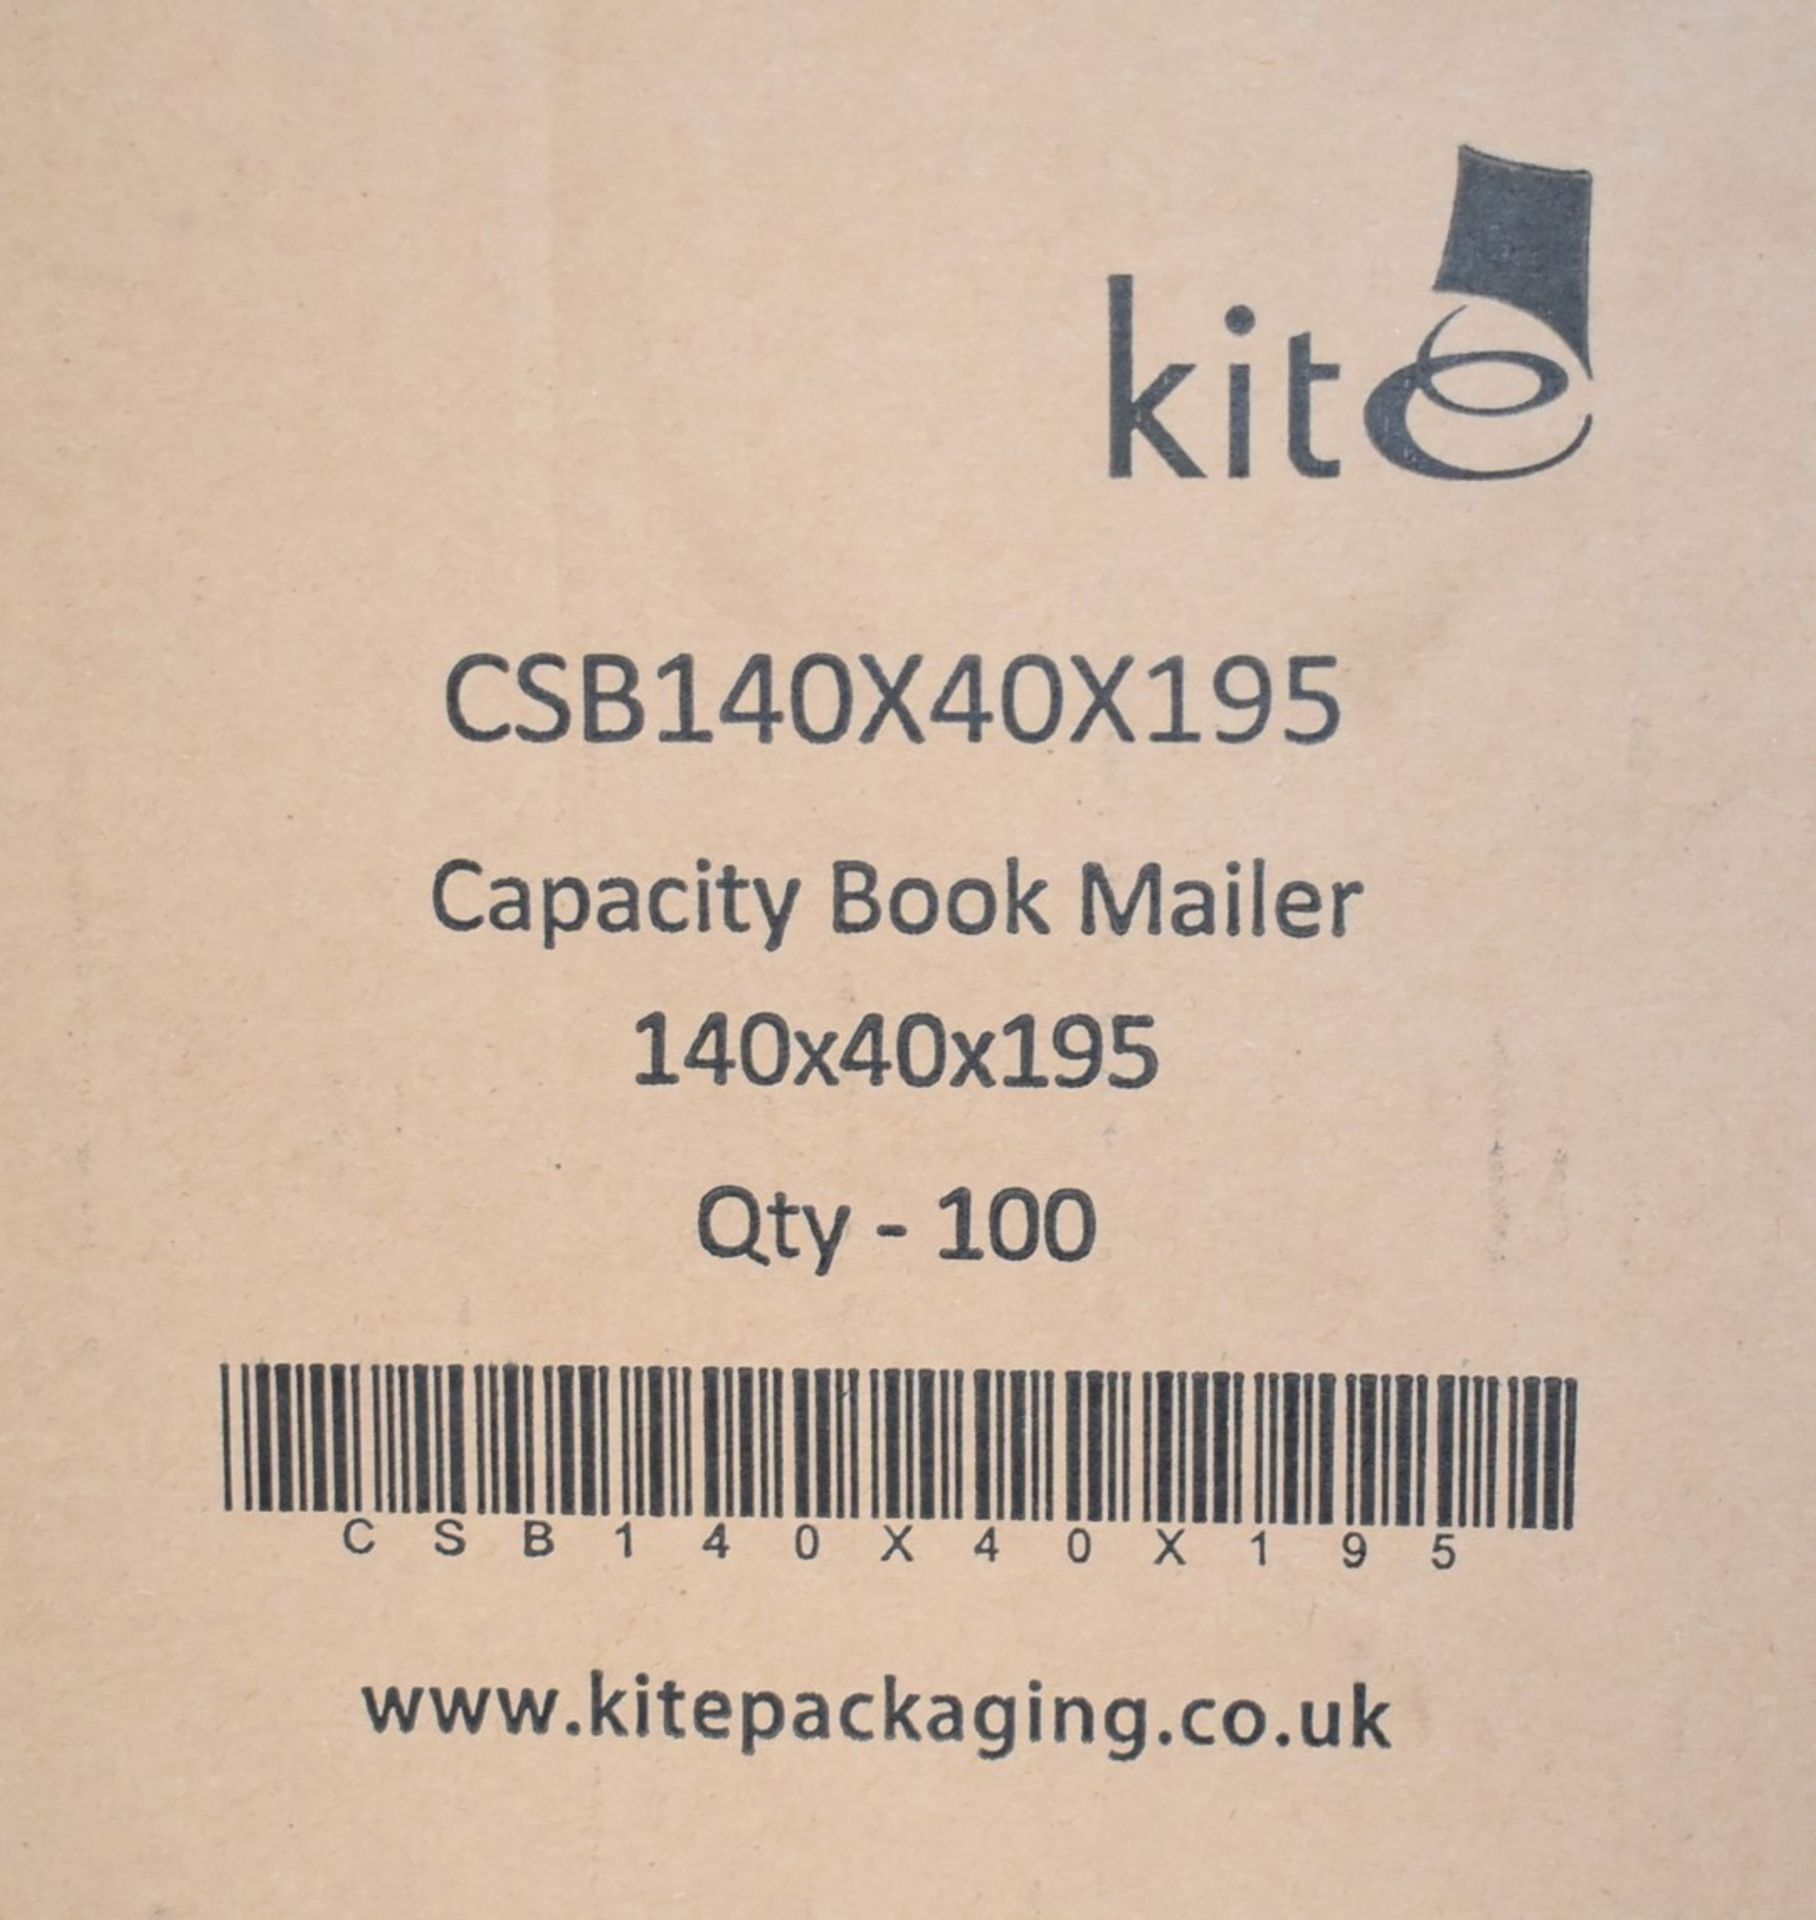 100 x Capacity Book Mailer Cardboard Envelopes - Size: 140 x 140 x 195mm - Image 2 of 3